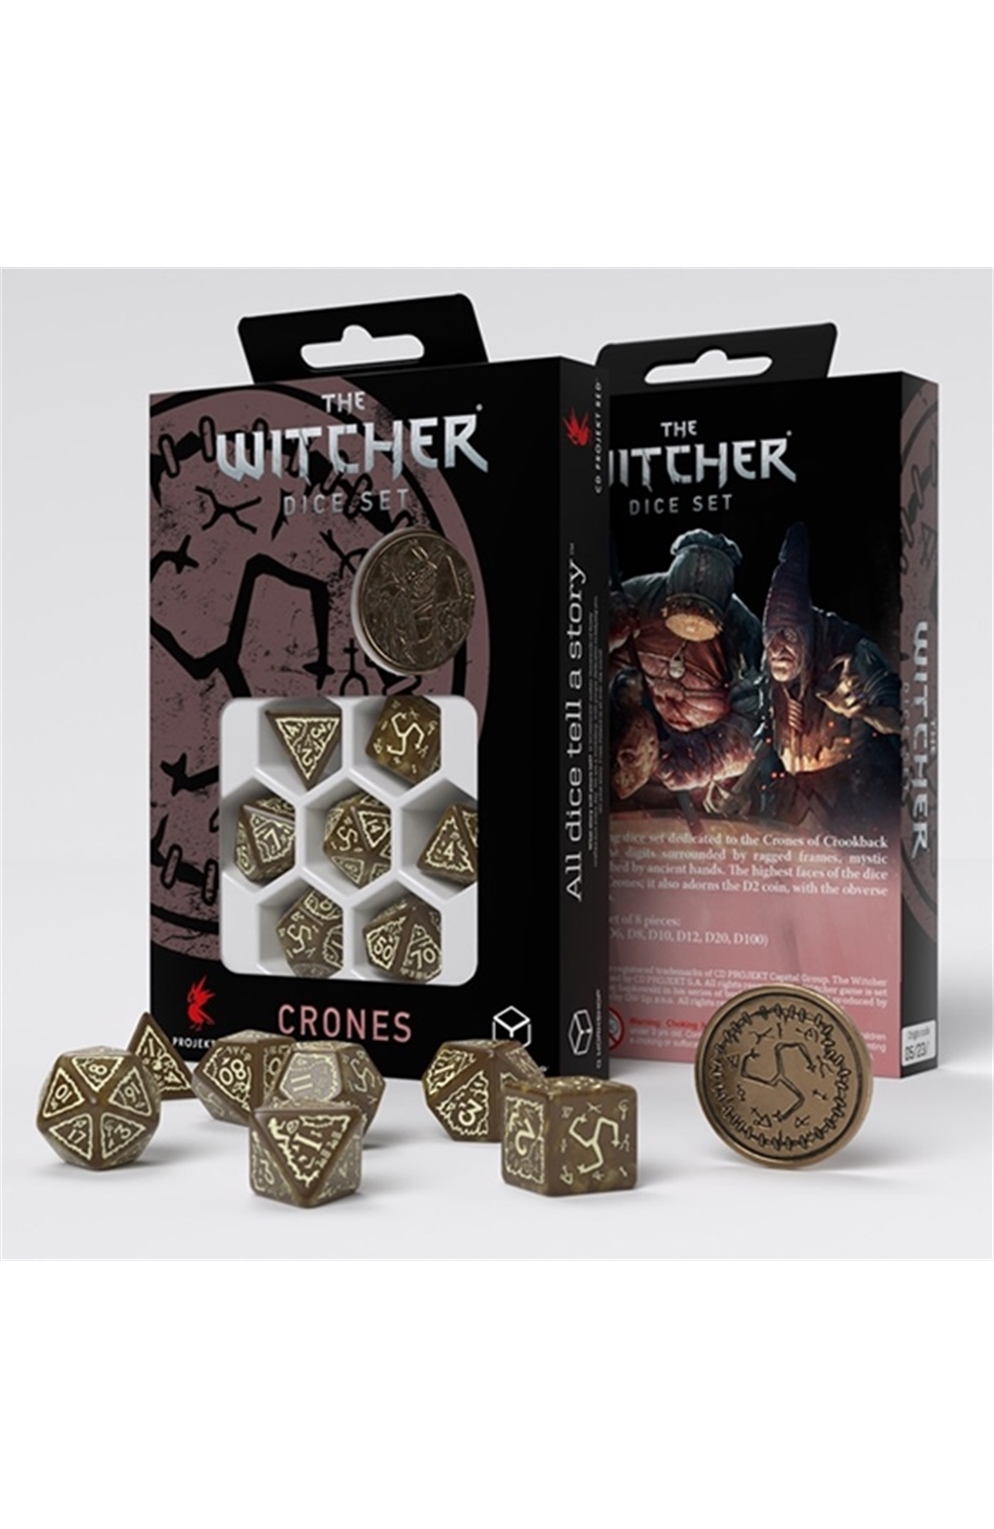 The Witcher 7 Dice Set: Crones-Weavess